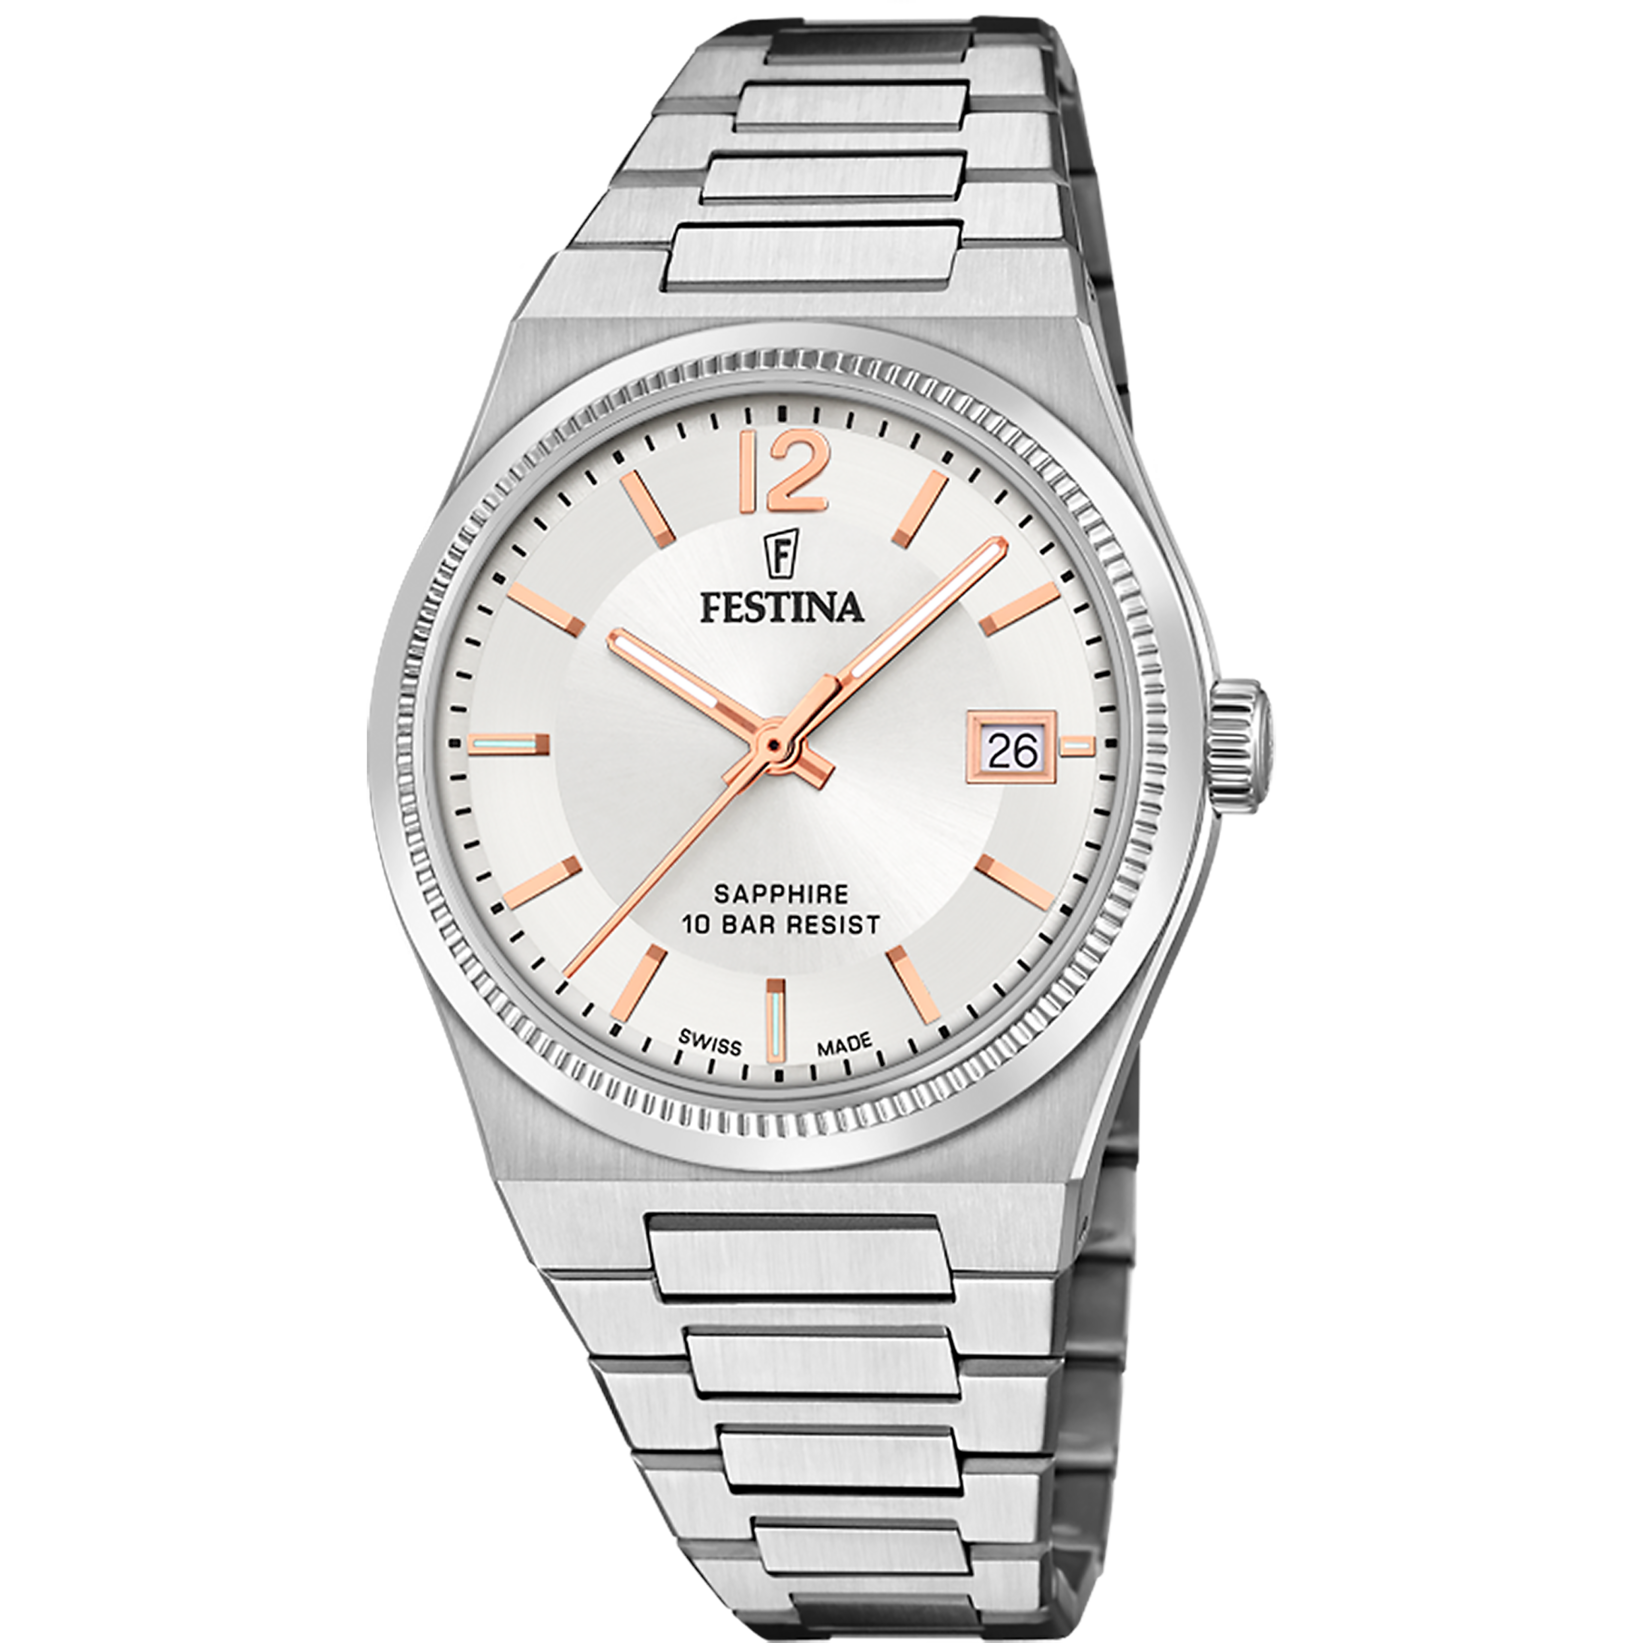 Festina Swiss Made F20035-2 - Analog - Strap Material Stainless Steel I Festina Watches USA